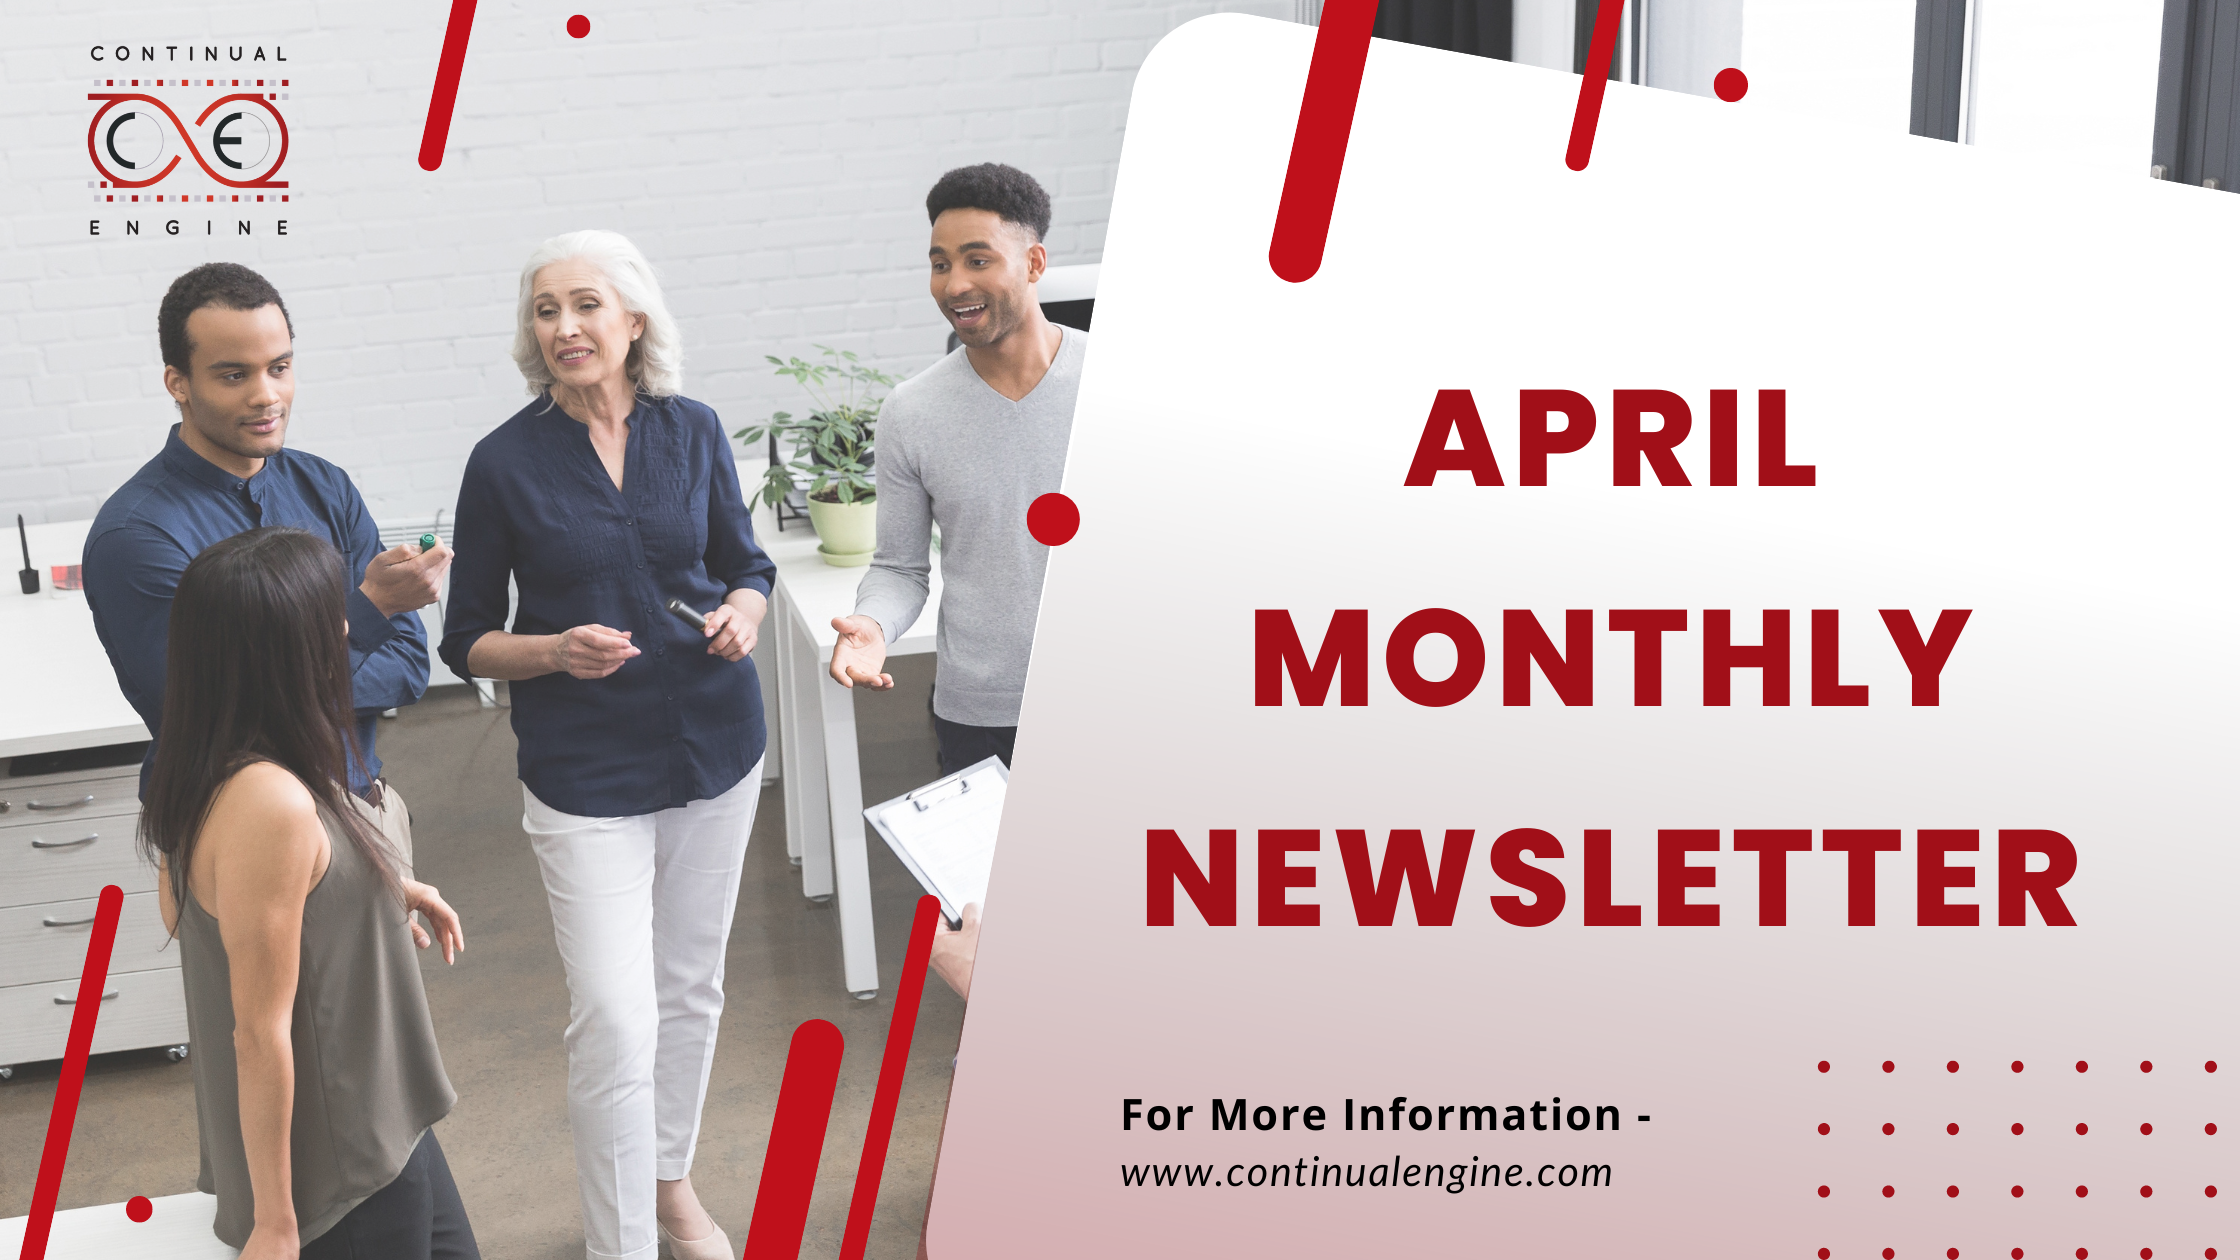 A creative with CONTINUAL ENGINE logo at the top left is shown. There is a text below that says April Monthly Newsletter.